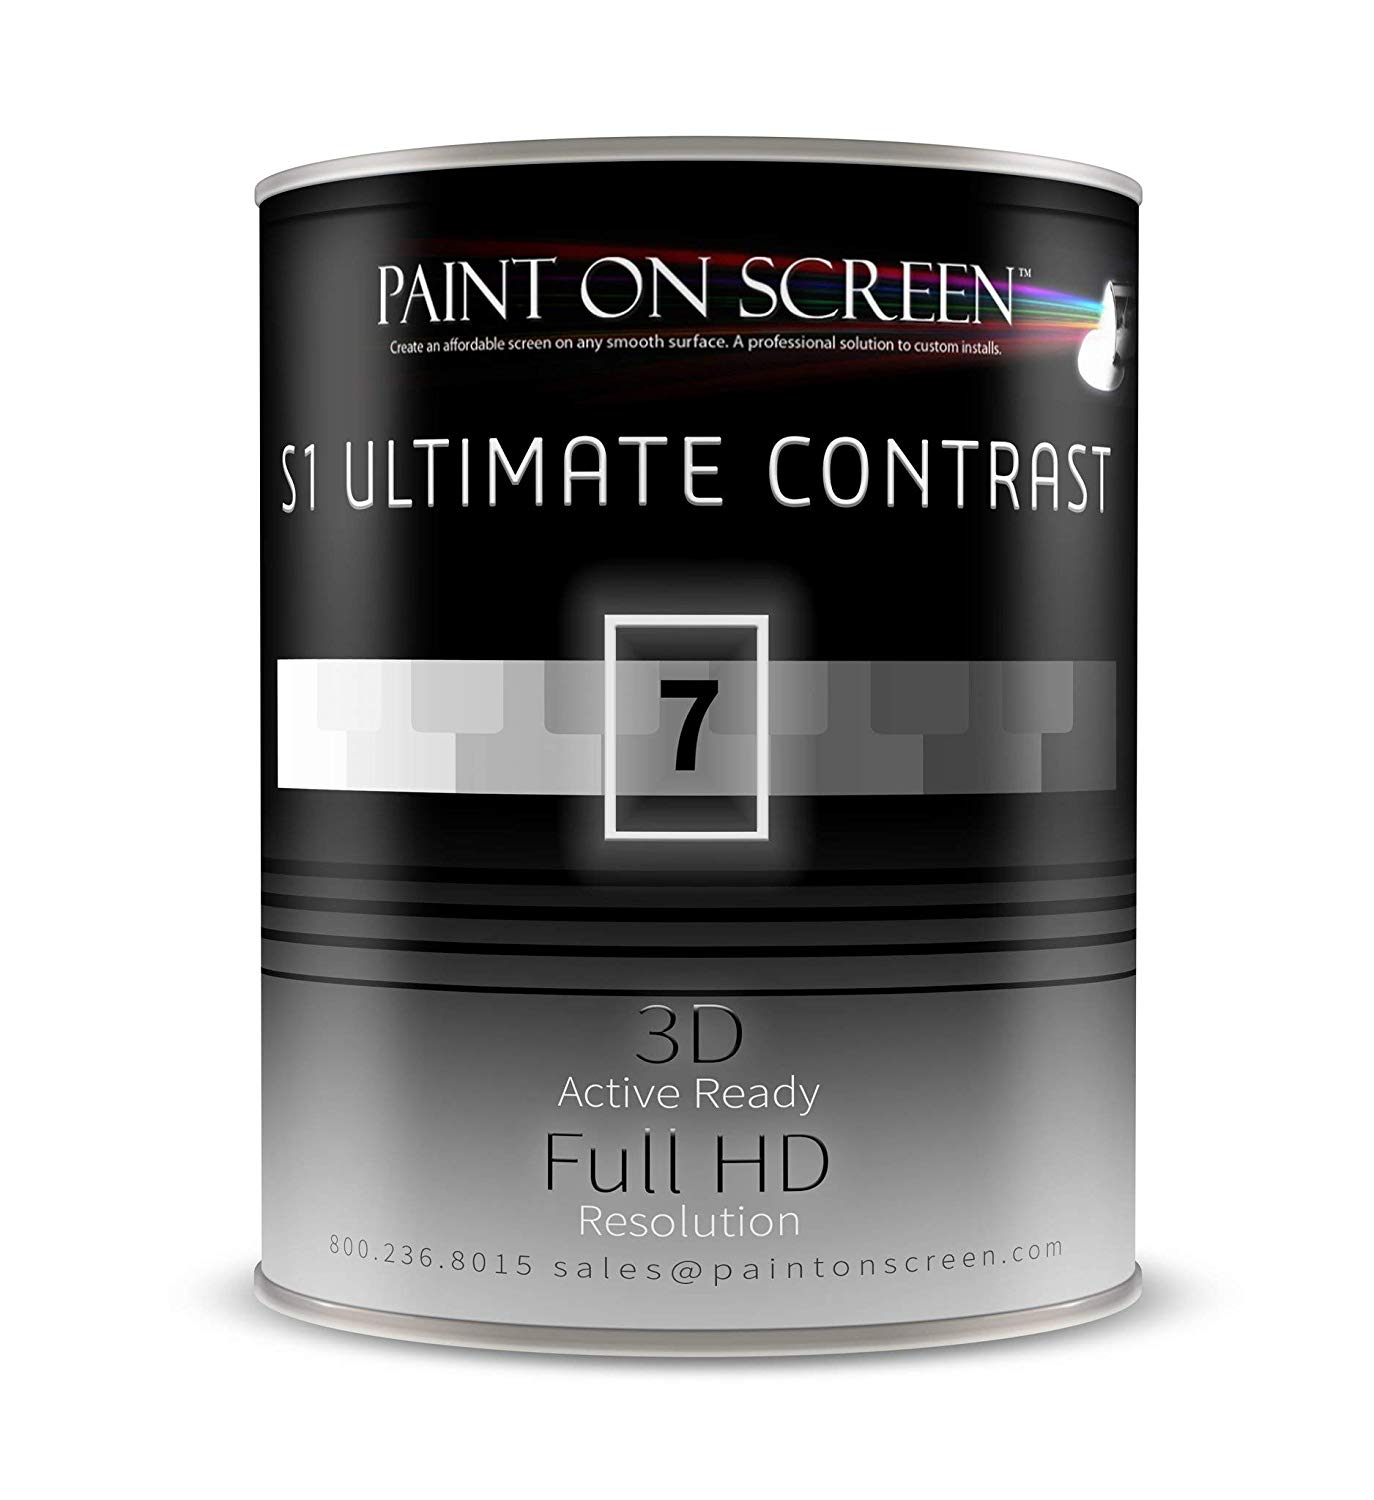 Paint On Screen S1 Ultimate Contrast